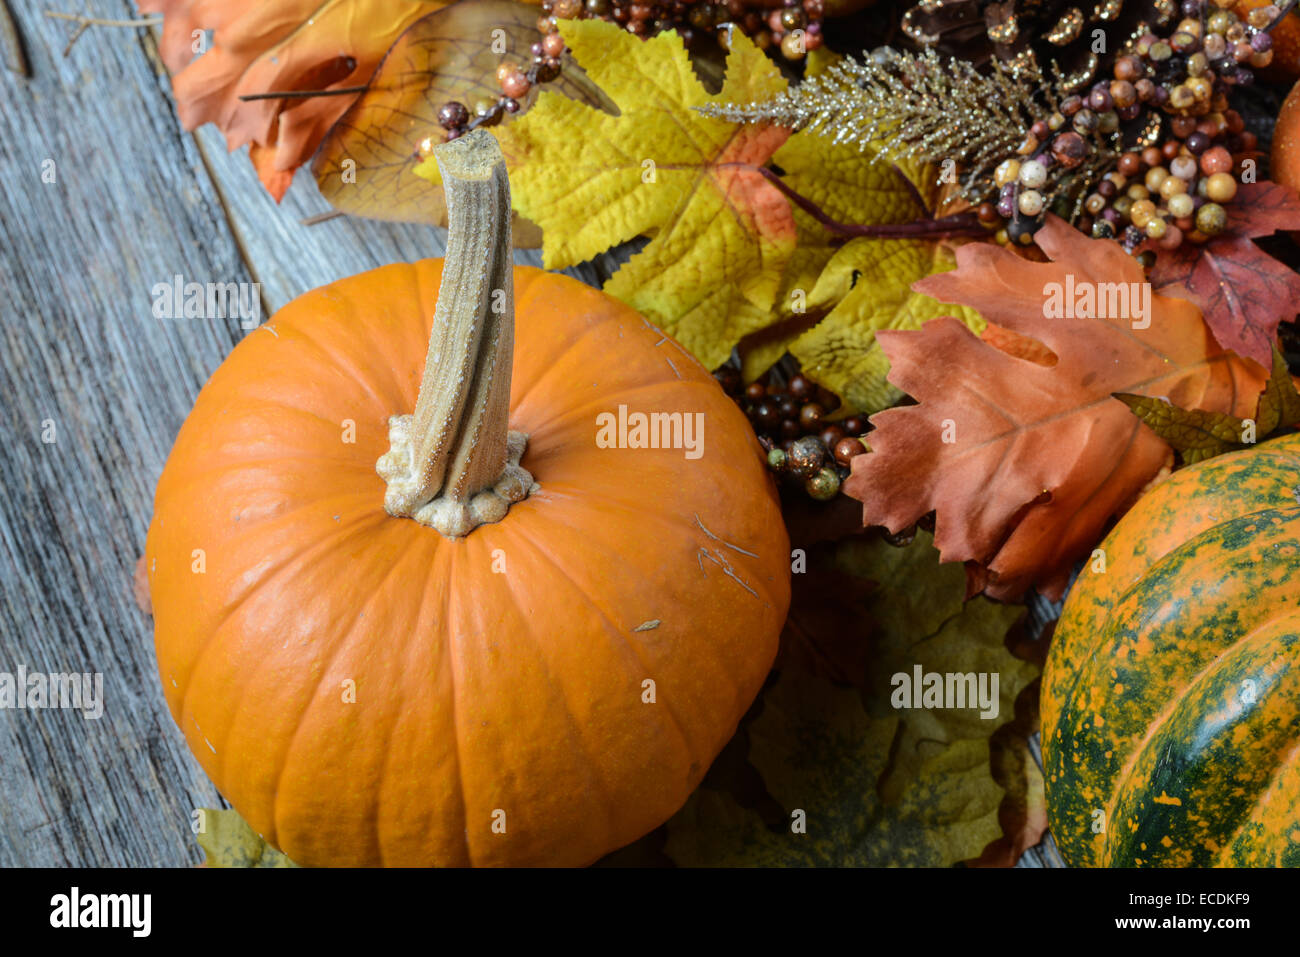 Autumn Pumpkins surrounded by leaves Stock Photo